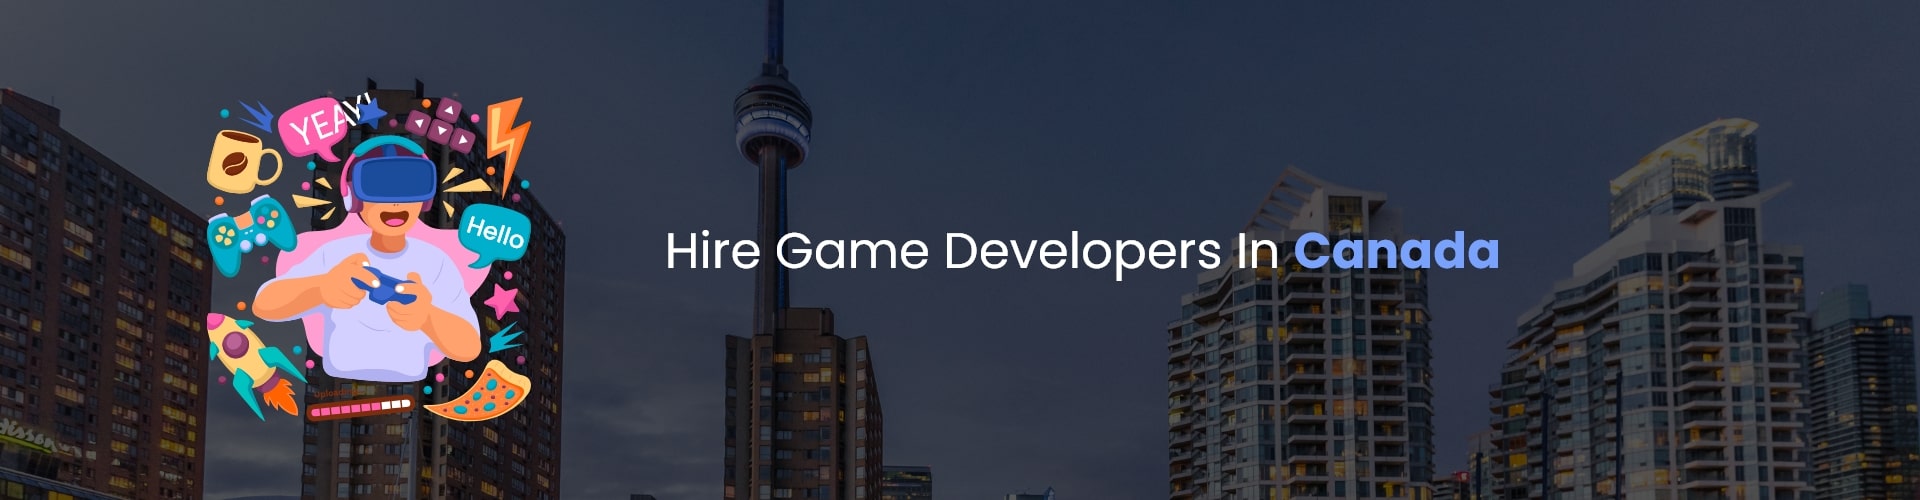 hire game developers in canada